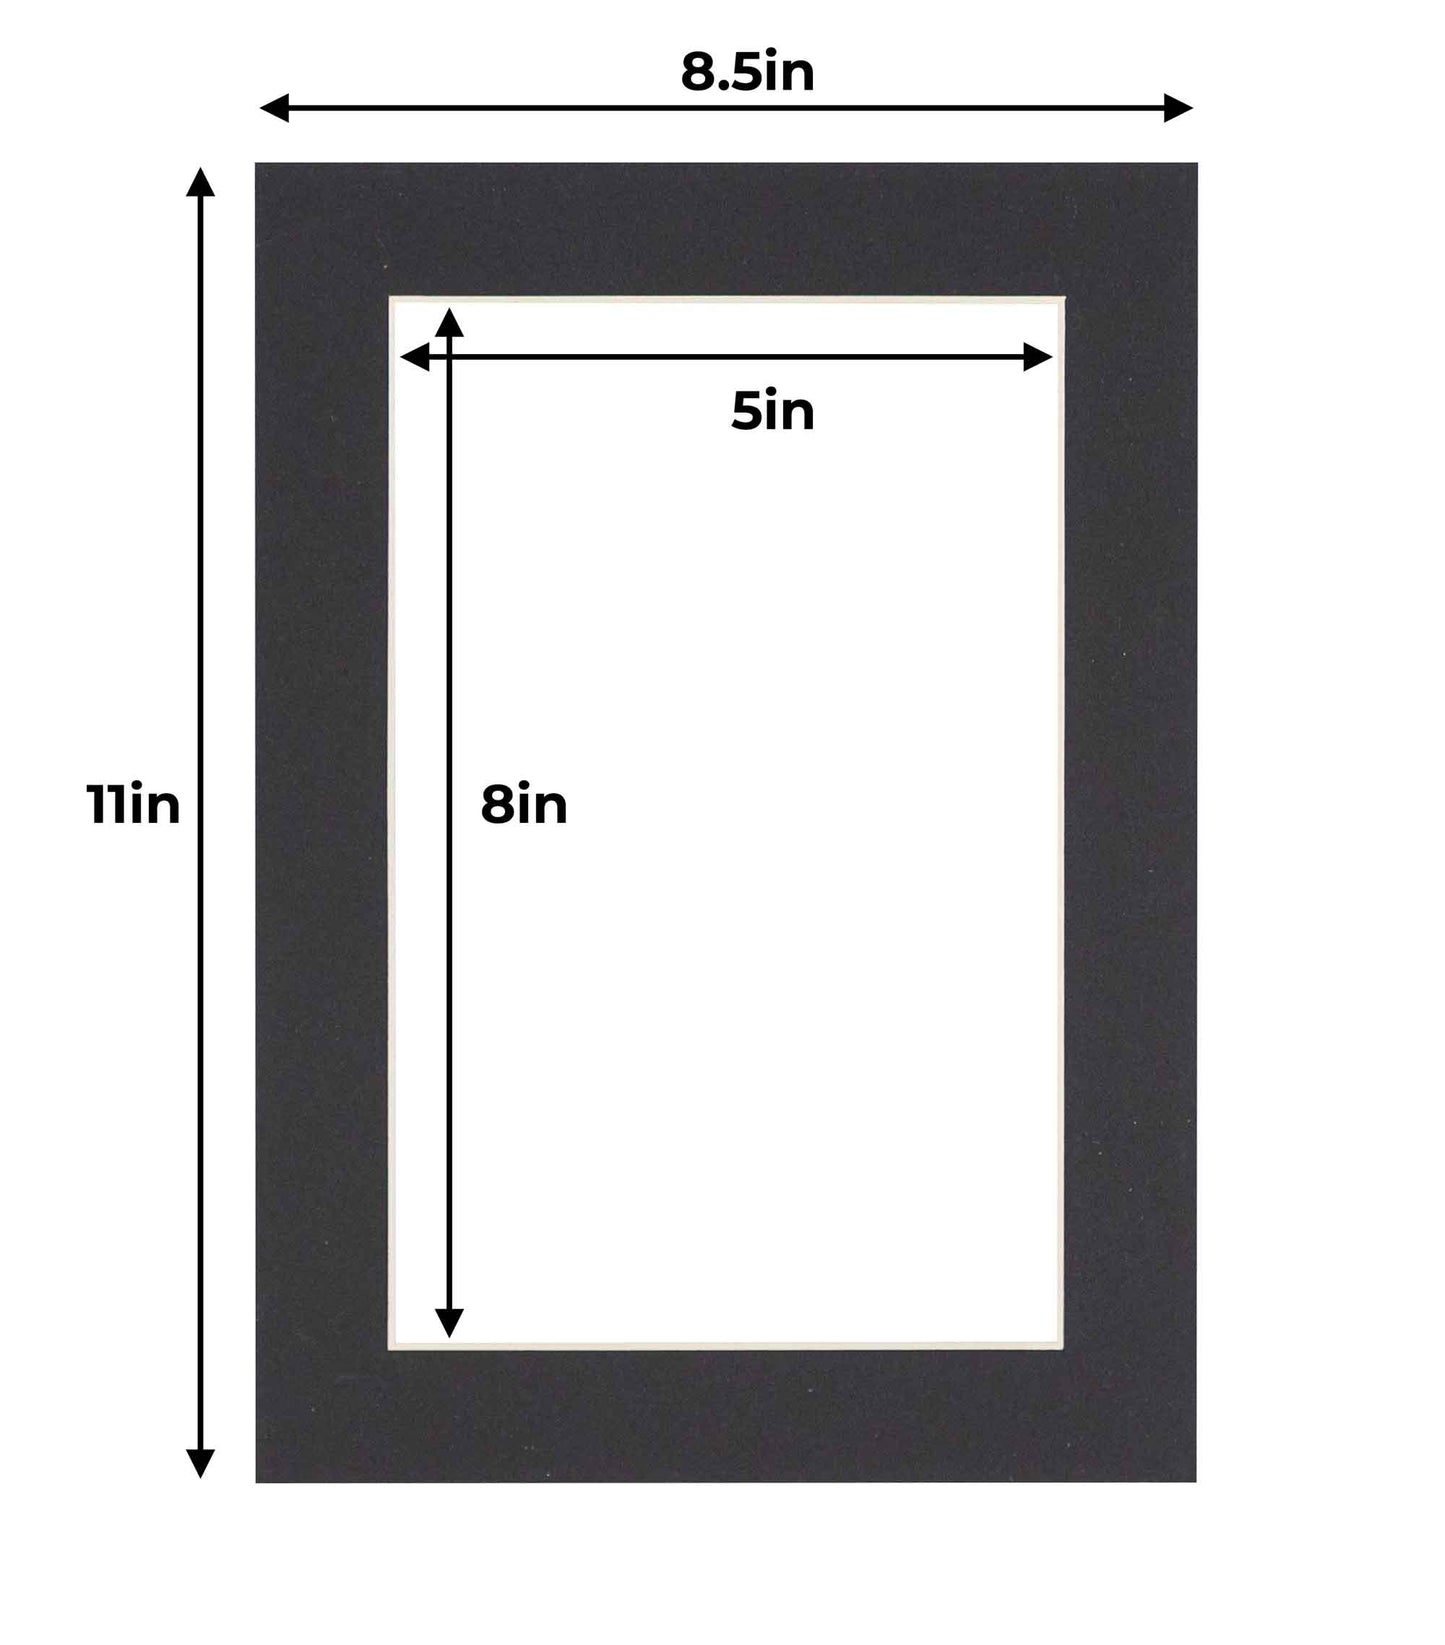 Pack of 10 Black Precut Acid-Free Matboard Set with Clear Bags & Backings